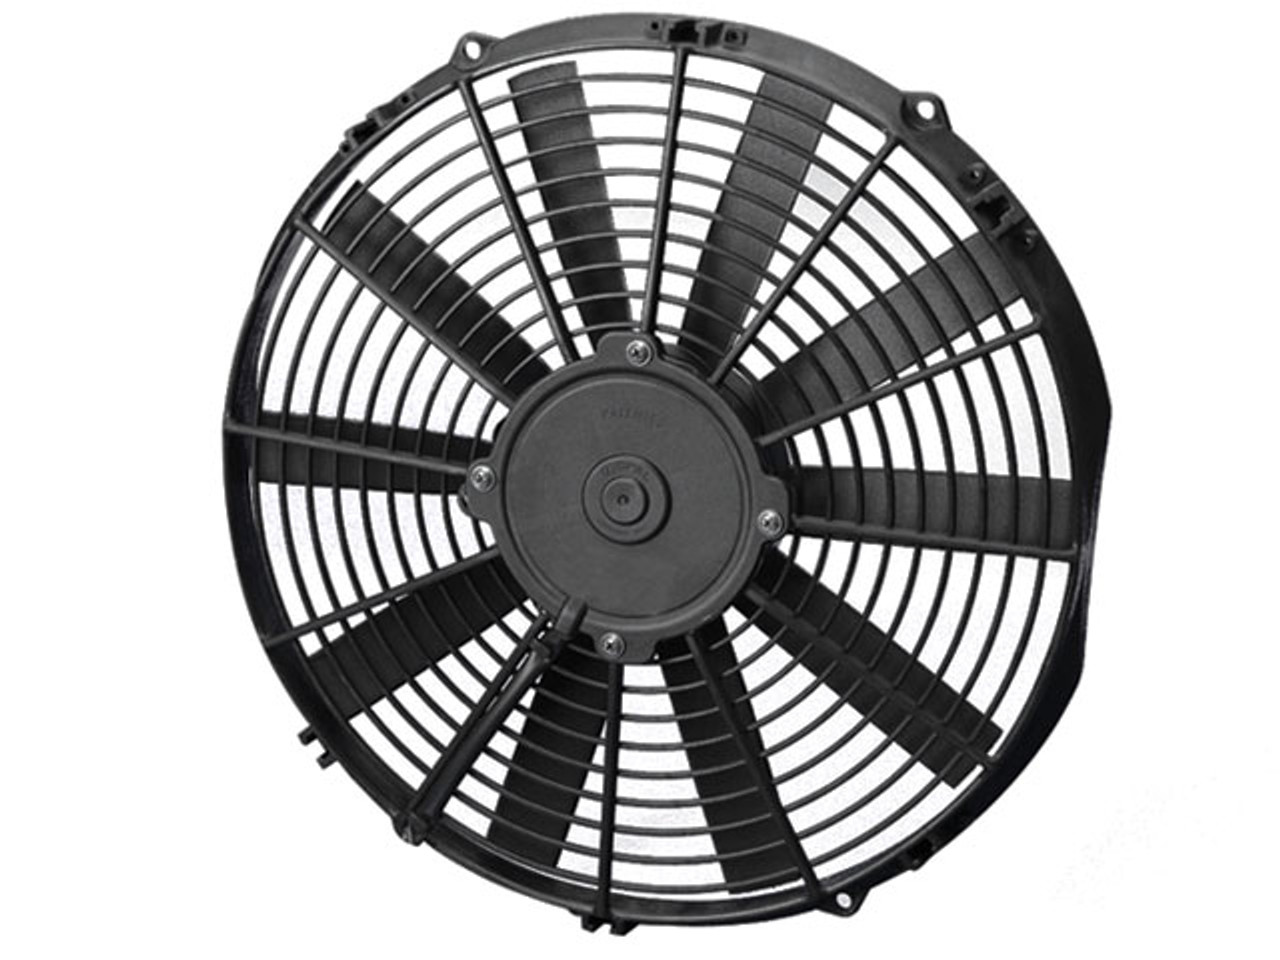 Spal 13in Pusher Fan Curved Blade 1032 CFM - SPA30100399